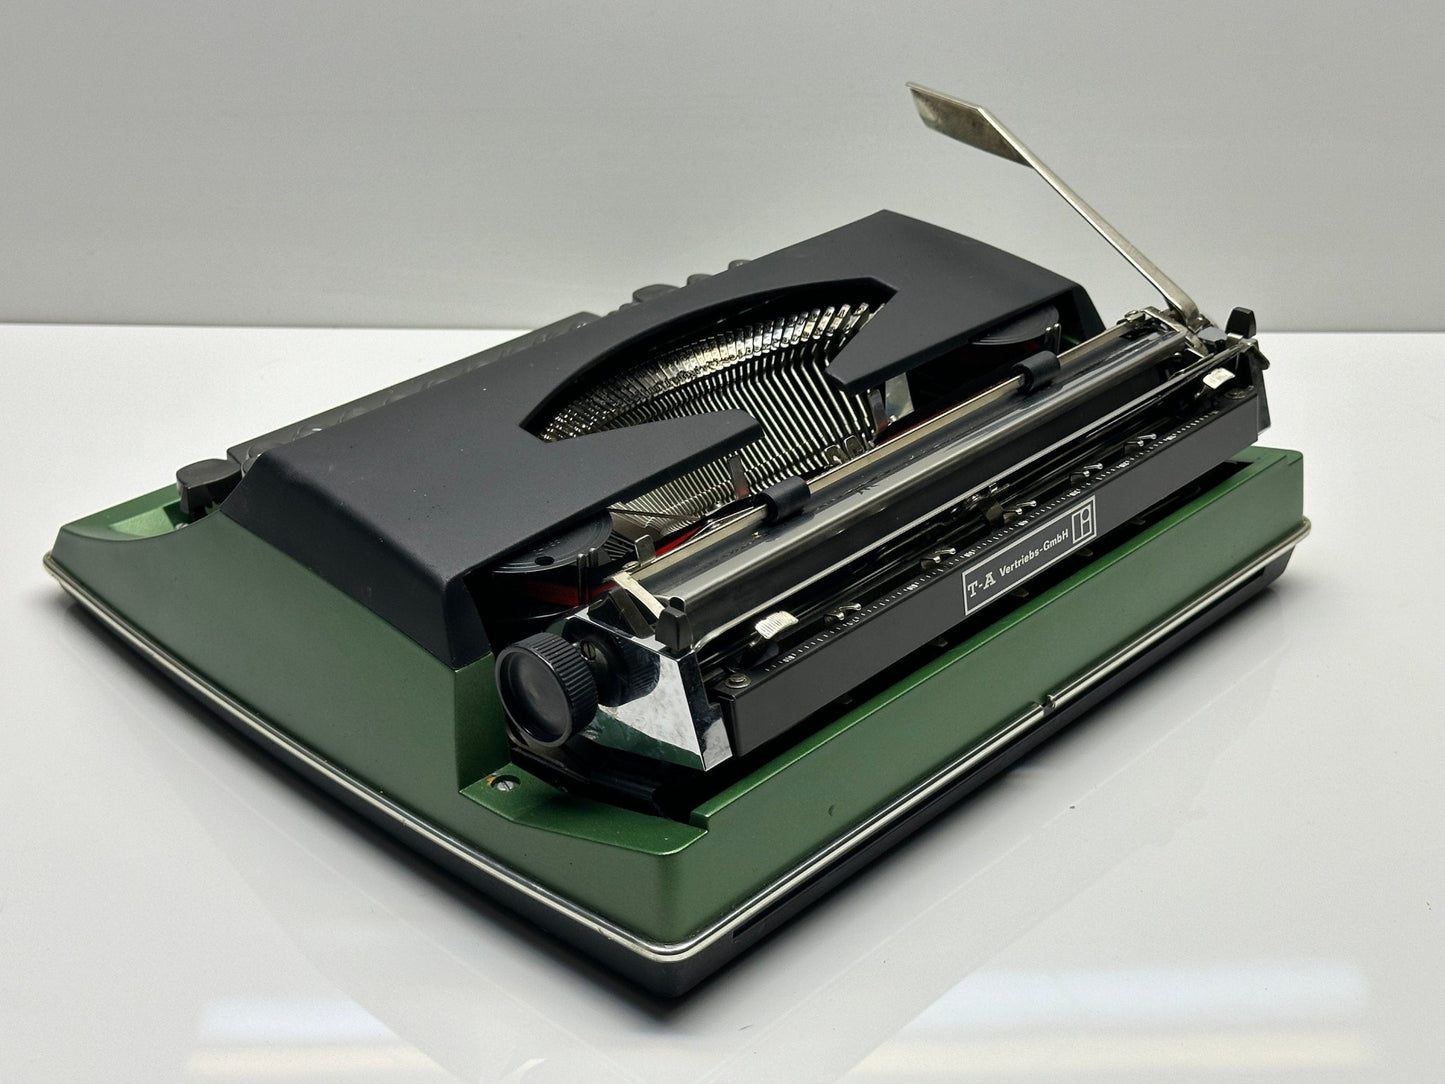 Adler Contessa Deluxe Typewriter - Black Cover and Green Body, QWERTY Option, Refurbished with Black Bag